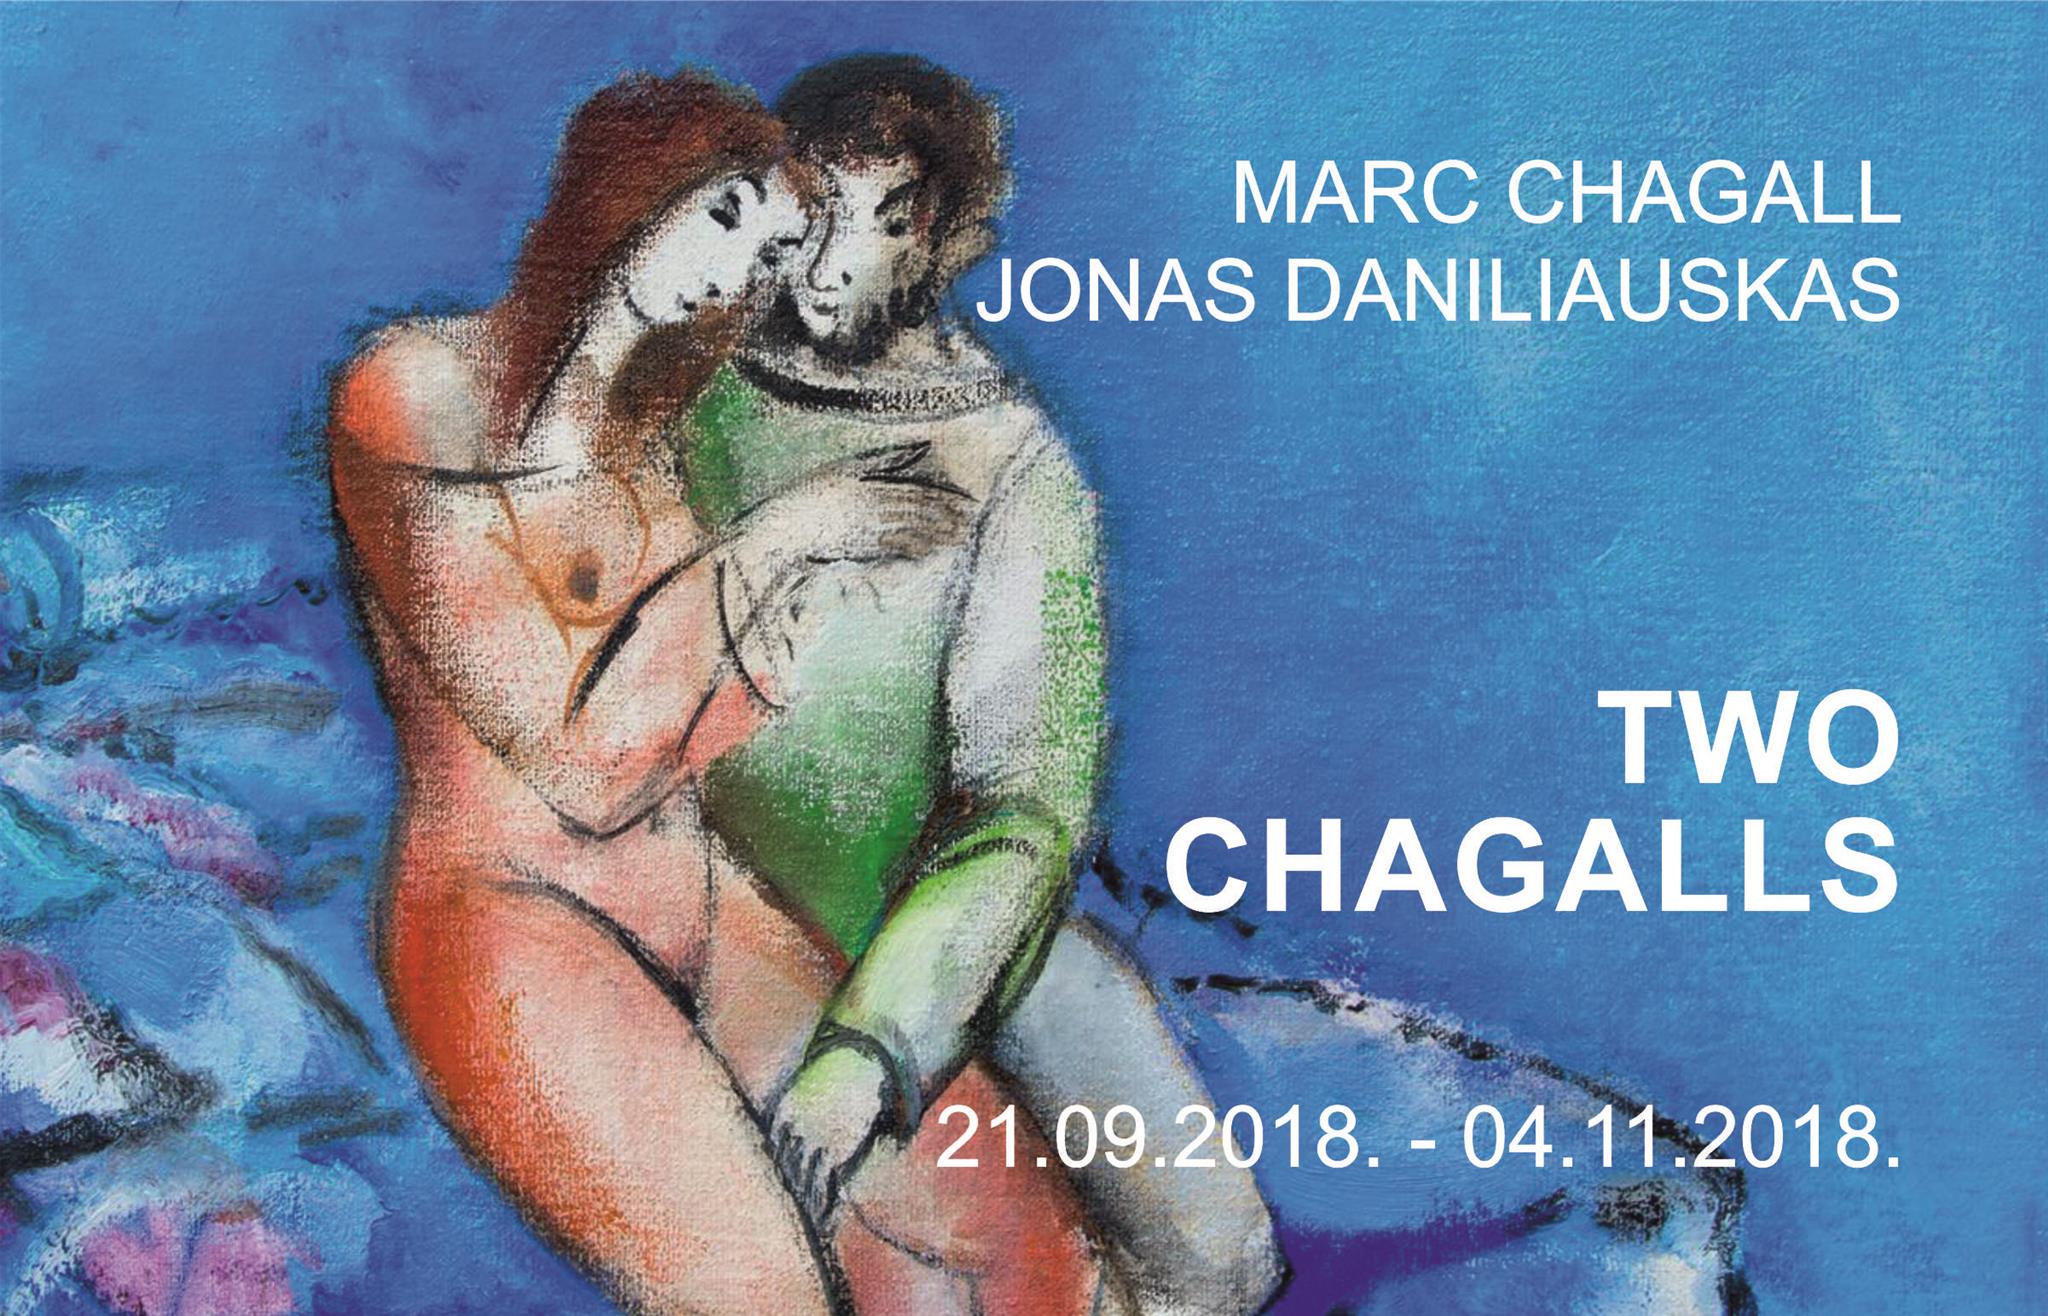 CHAGALL ONE AND TWO